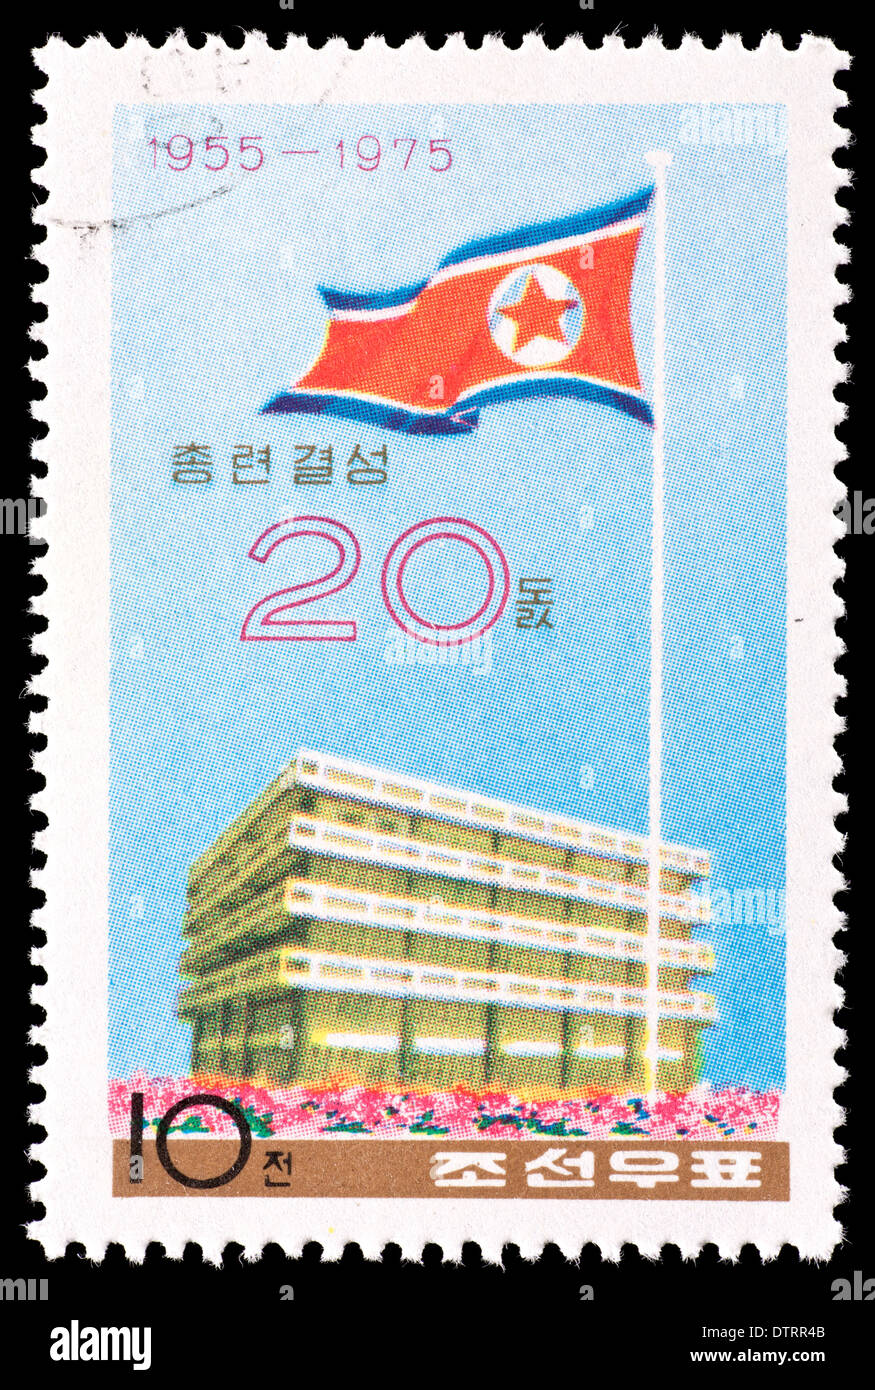 Postage stamp from North Korea issued for the Chongryon Association of Koreans in Japan. Stock Photo